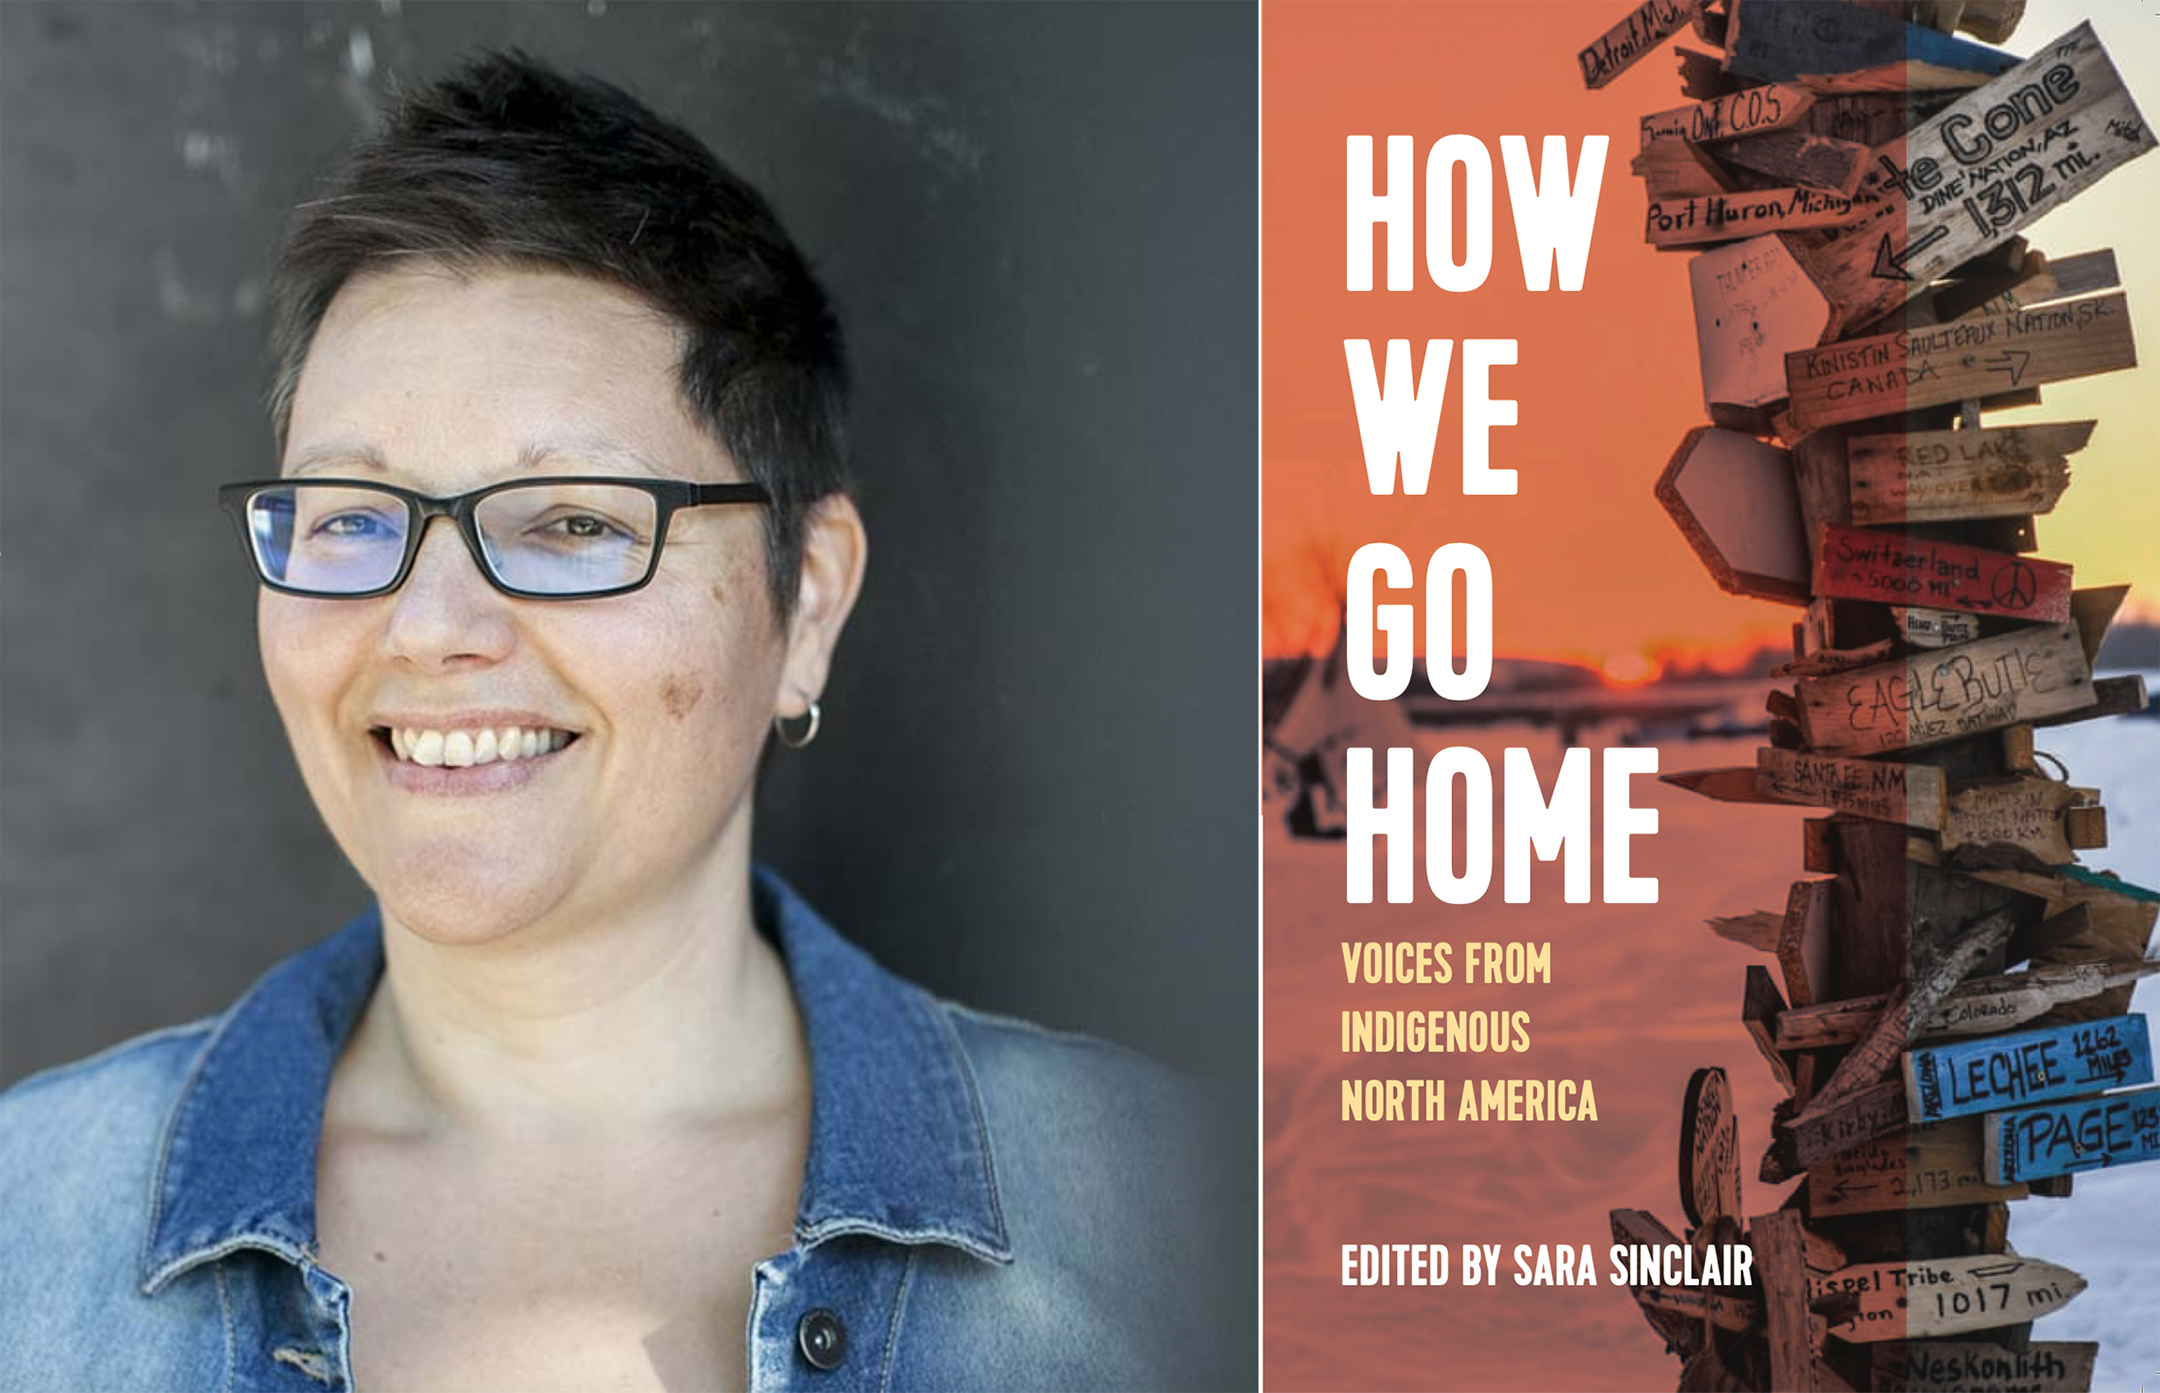 Photograph of author Suzanne Methot on the left and the cover of the book How We Go Home on the right